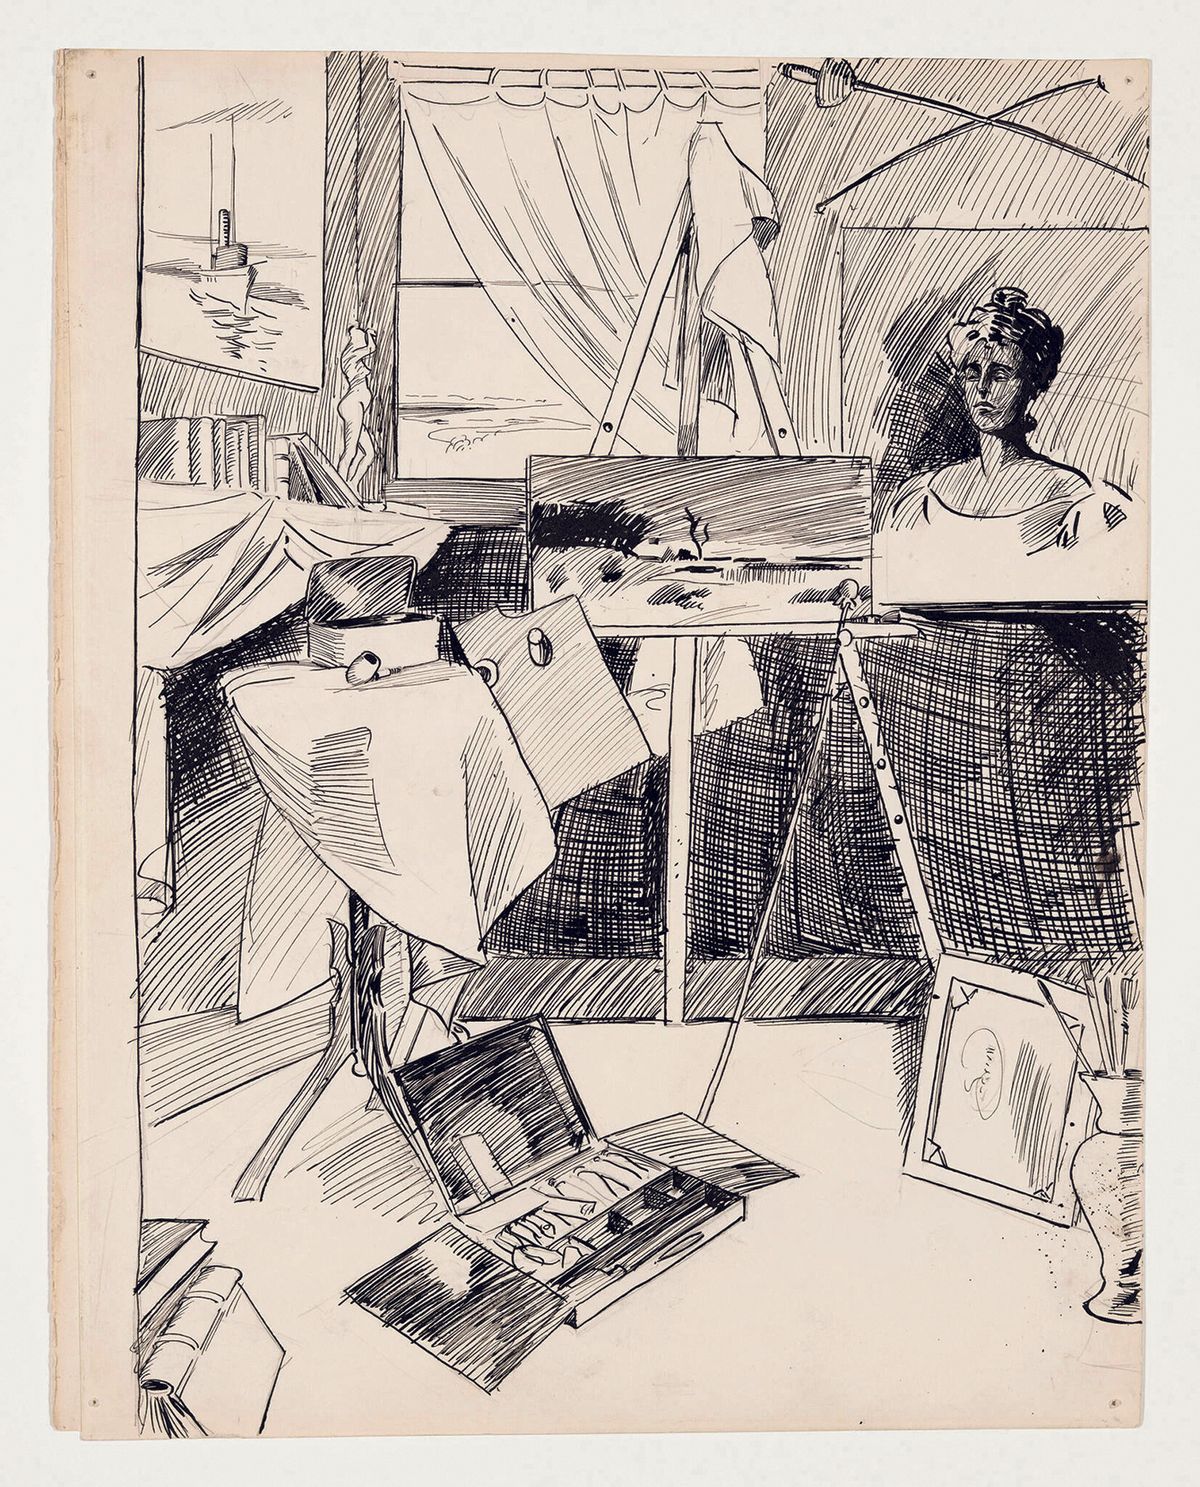 Hopper’s drawing of his studio in the attic of the family home (around 1900), with a painting on the easel. The painting and easel, together with the attic’s contents, came to be owned by the reverend Sanborn

©️ 2022 Heirs of Josephine N. Hopper/Licensed by Artists Rights Society (ARS)